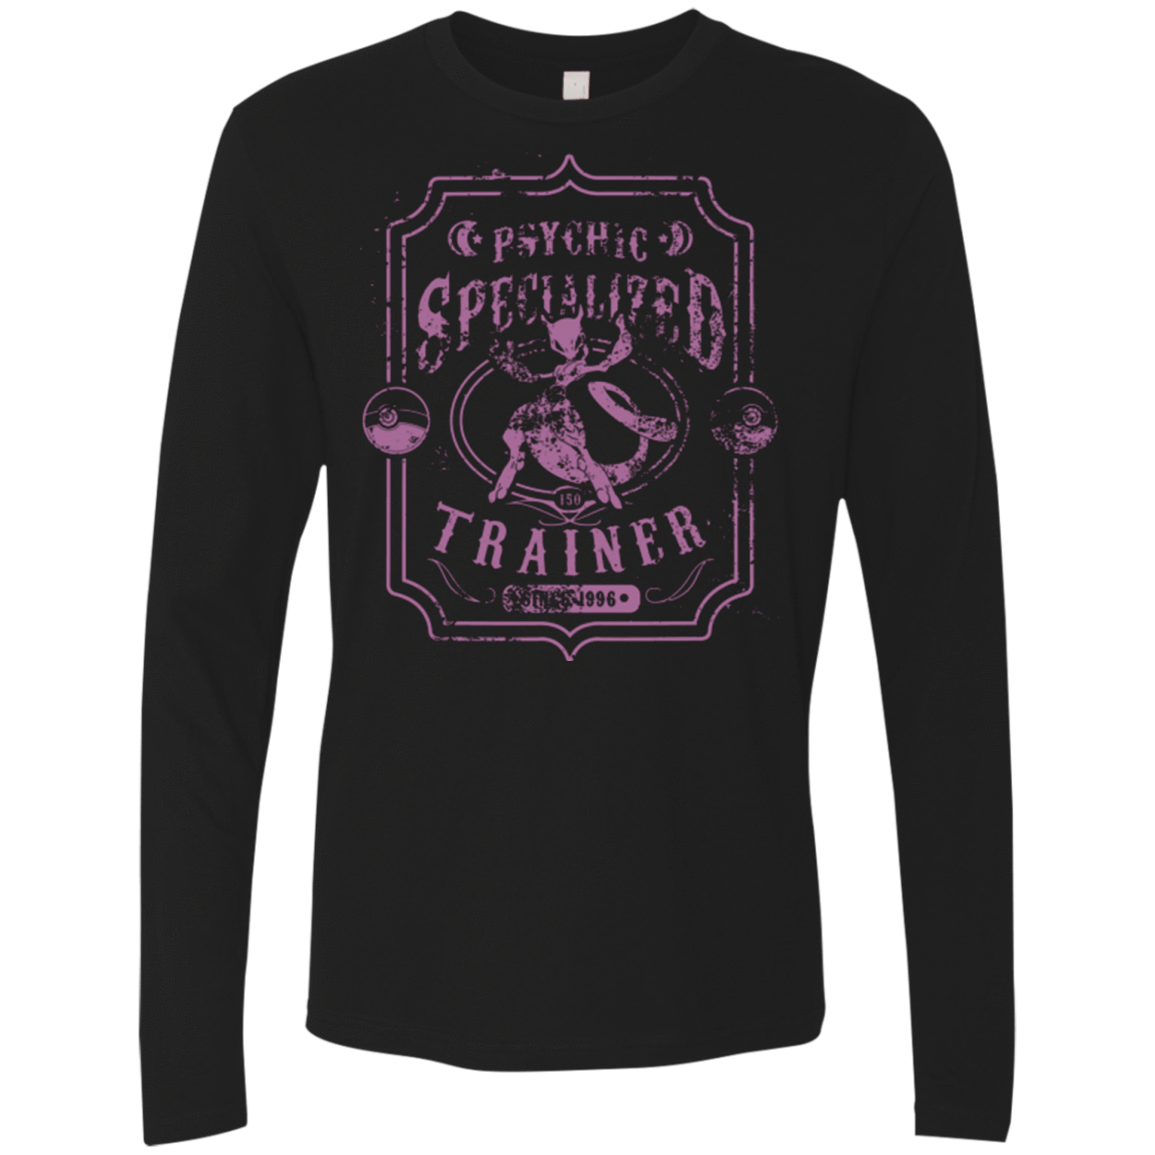 T-Shirts Black / Small Psychic Specialized Trainer 2 Men's Premium Long Sleeve